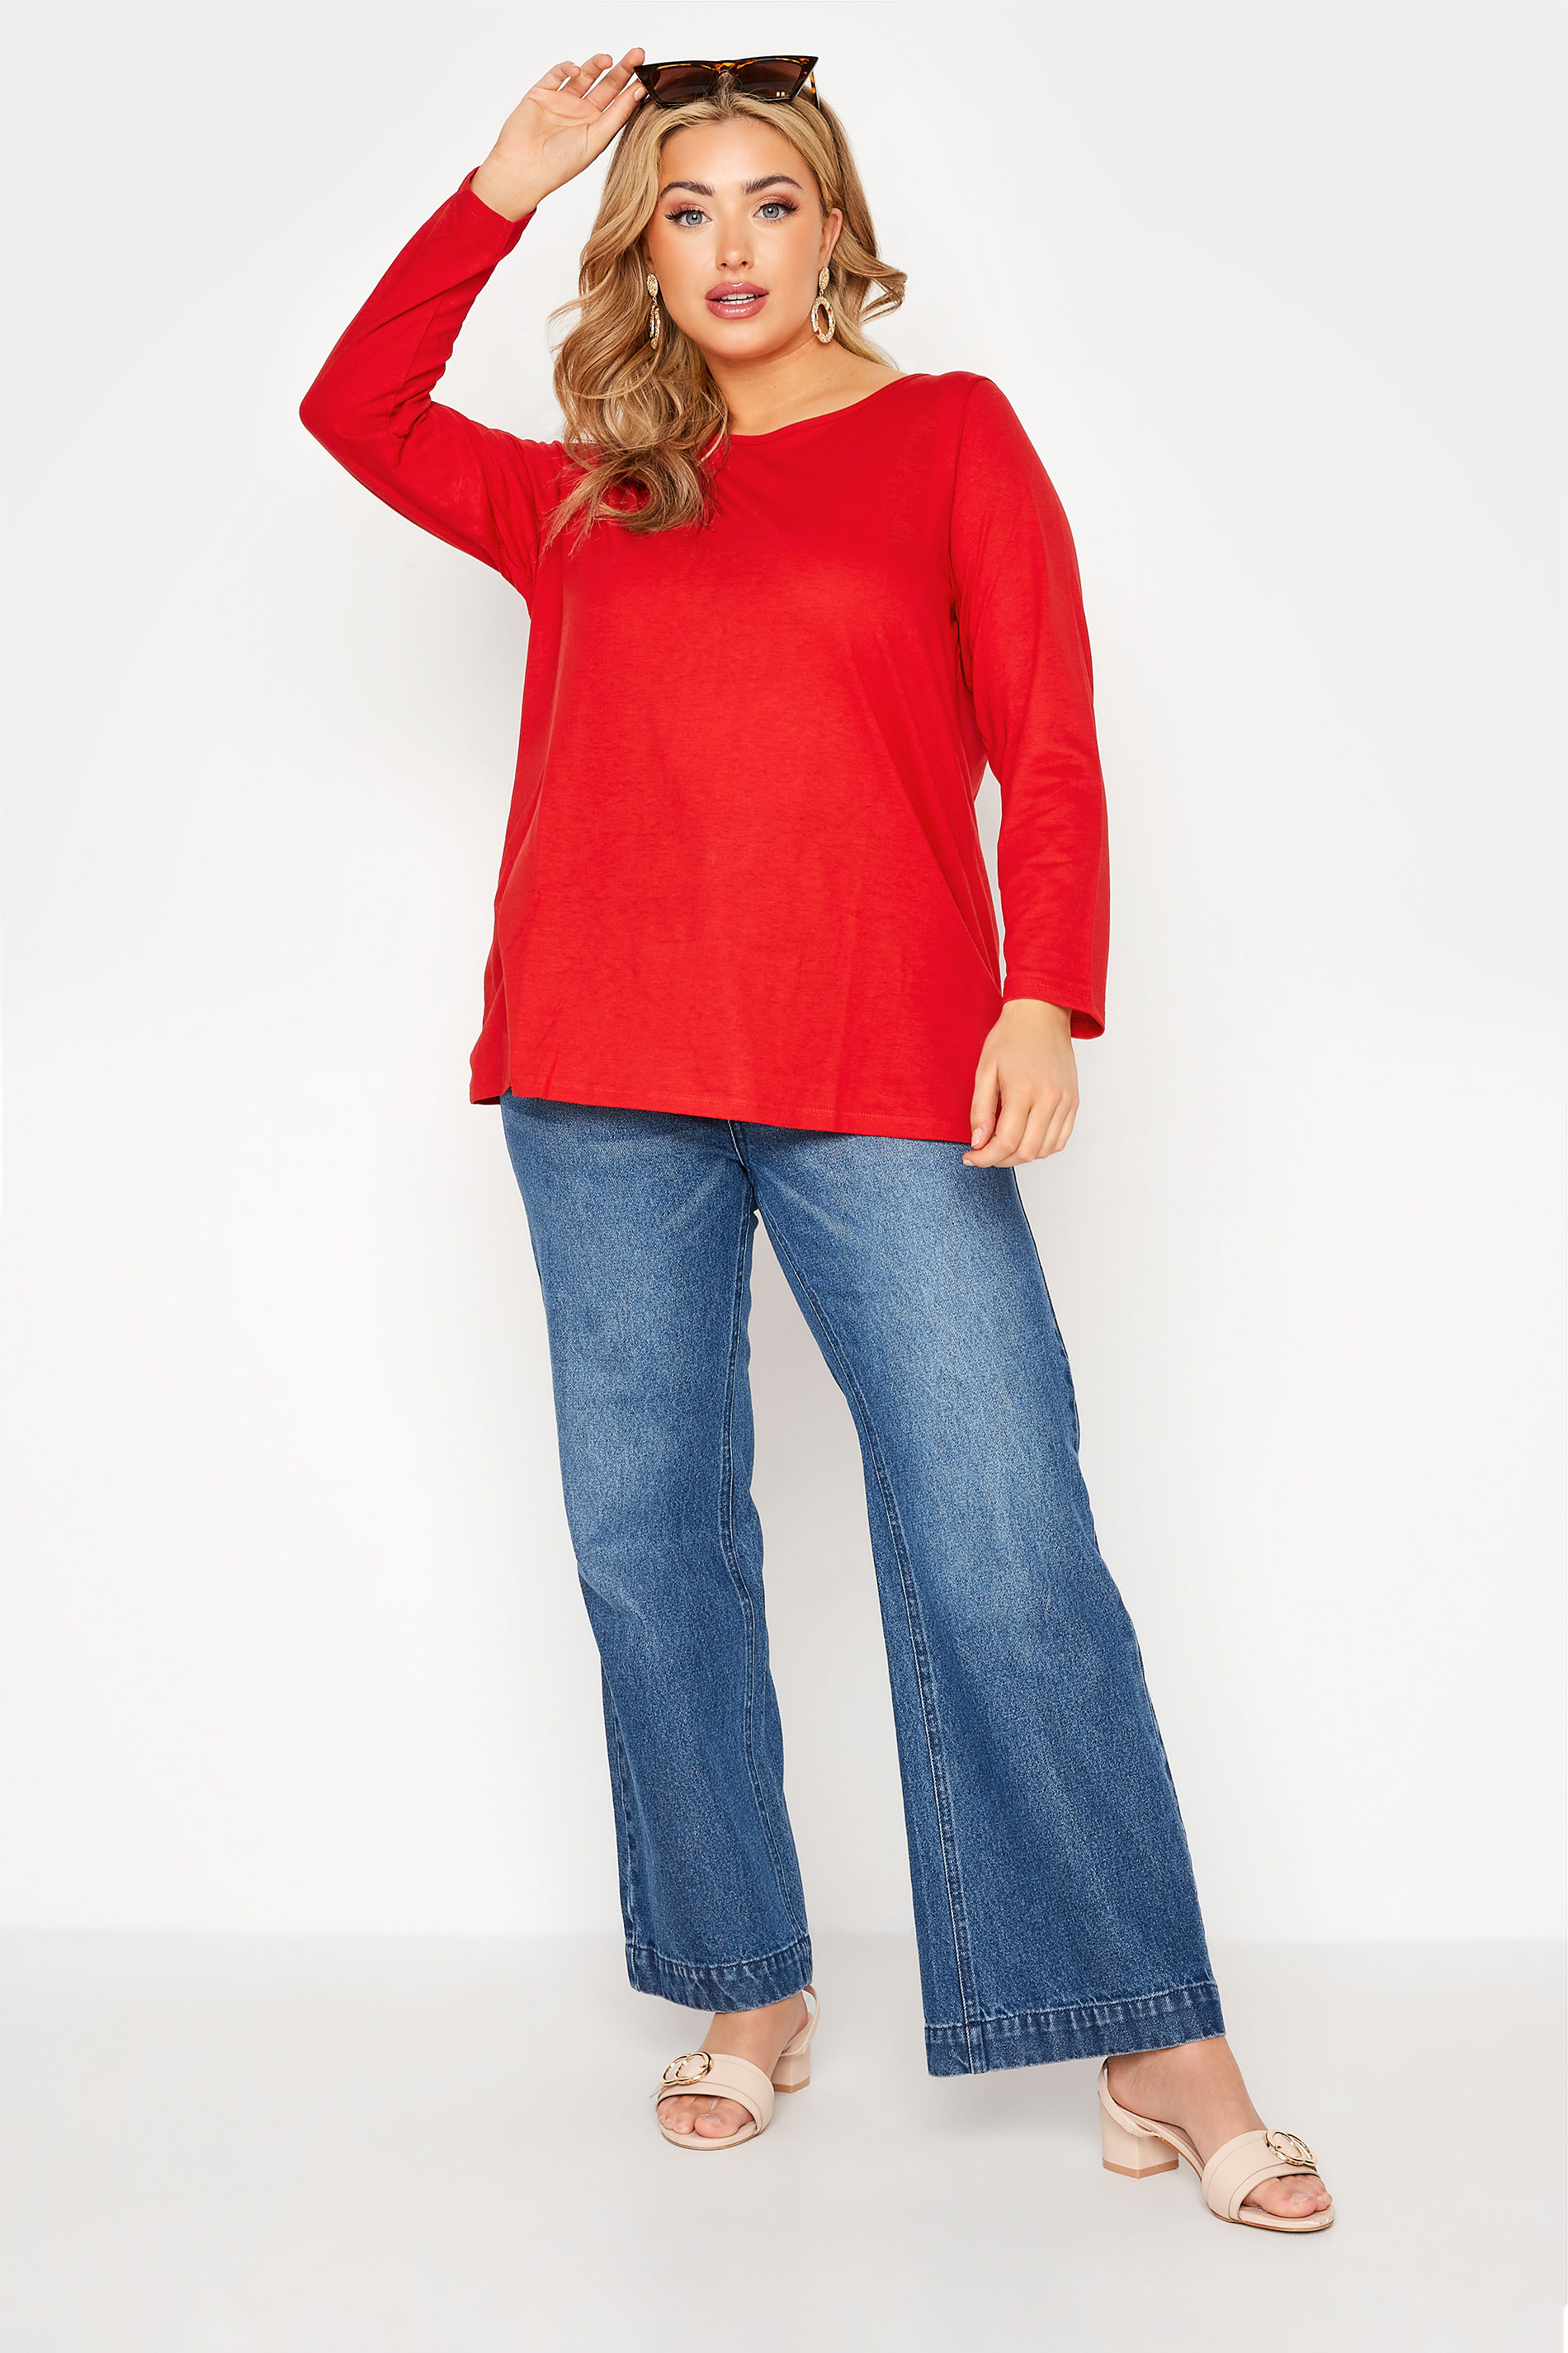 Grande taille  Tops Grande taille  T-Shirts | T-Shirt Rouge Manches Longues en Jersey - CN67905